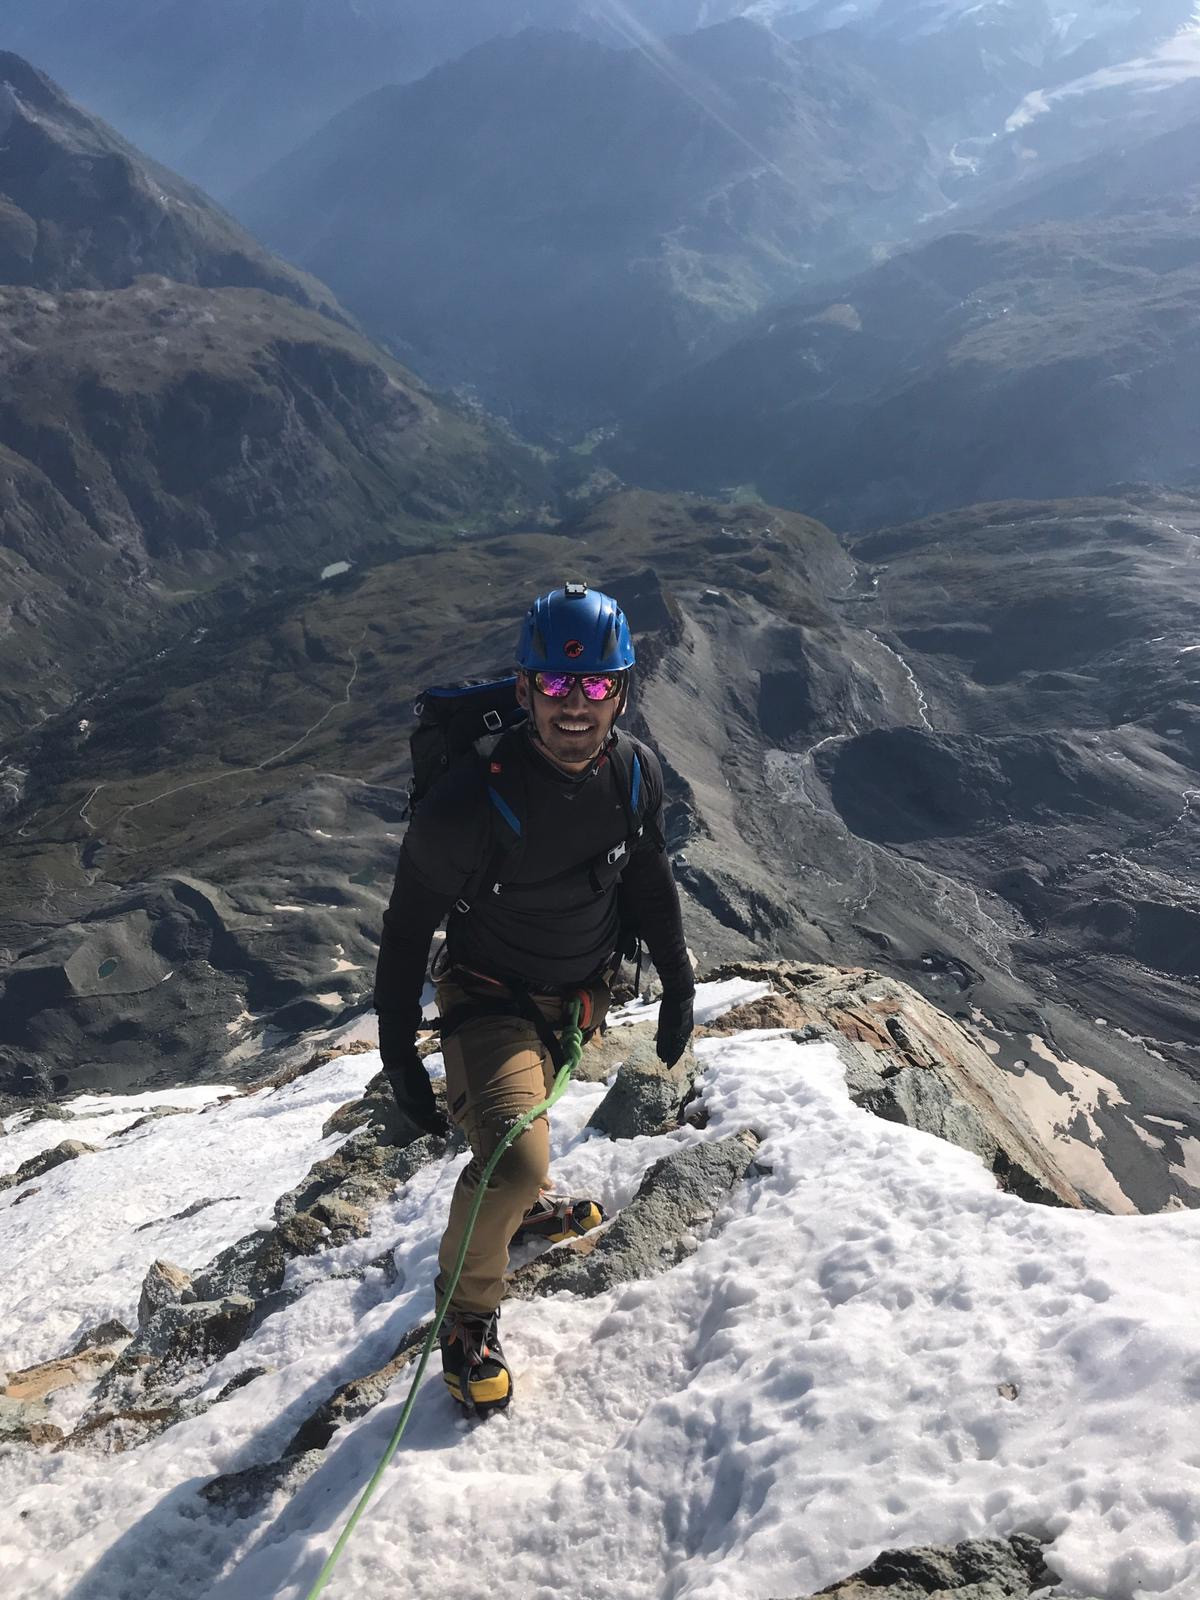  Matthew Pace, the youngest Maltese to climb Matterhorn, plans on conquering Mount Kilimanjaro and Mont Blanc next.   Daniel Lichy